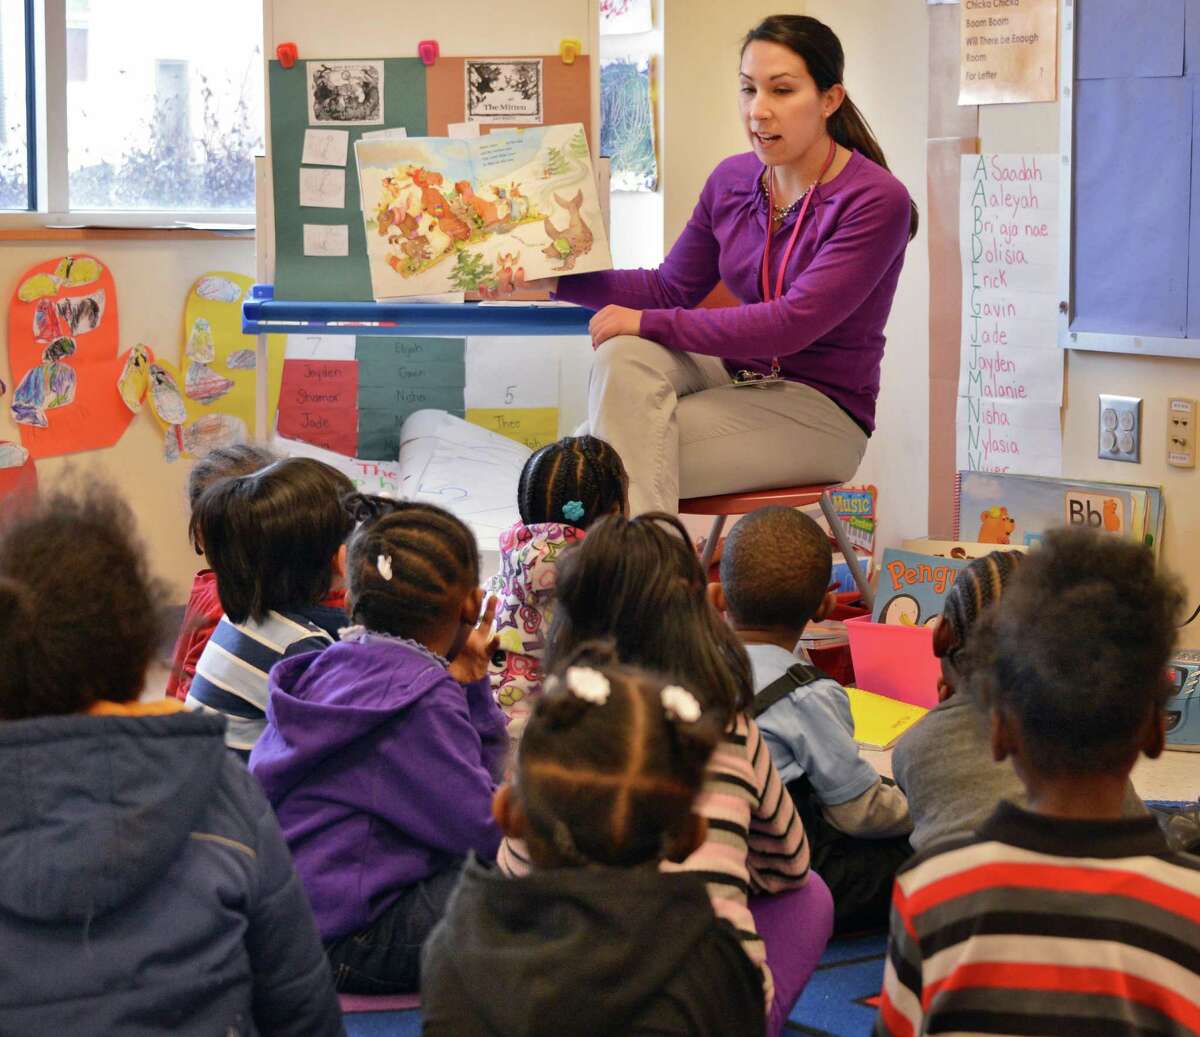 Pre-kindergarten teacher Rebecca DeNyse reads to her class at Sheridan Preparatory Academy in Albany Tuesday Jan. 22, 2013. (John Carl D'Annibale / Times Union)